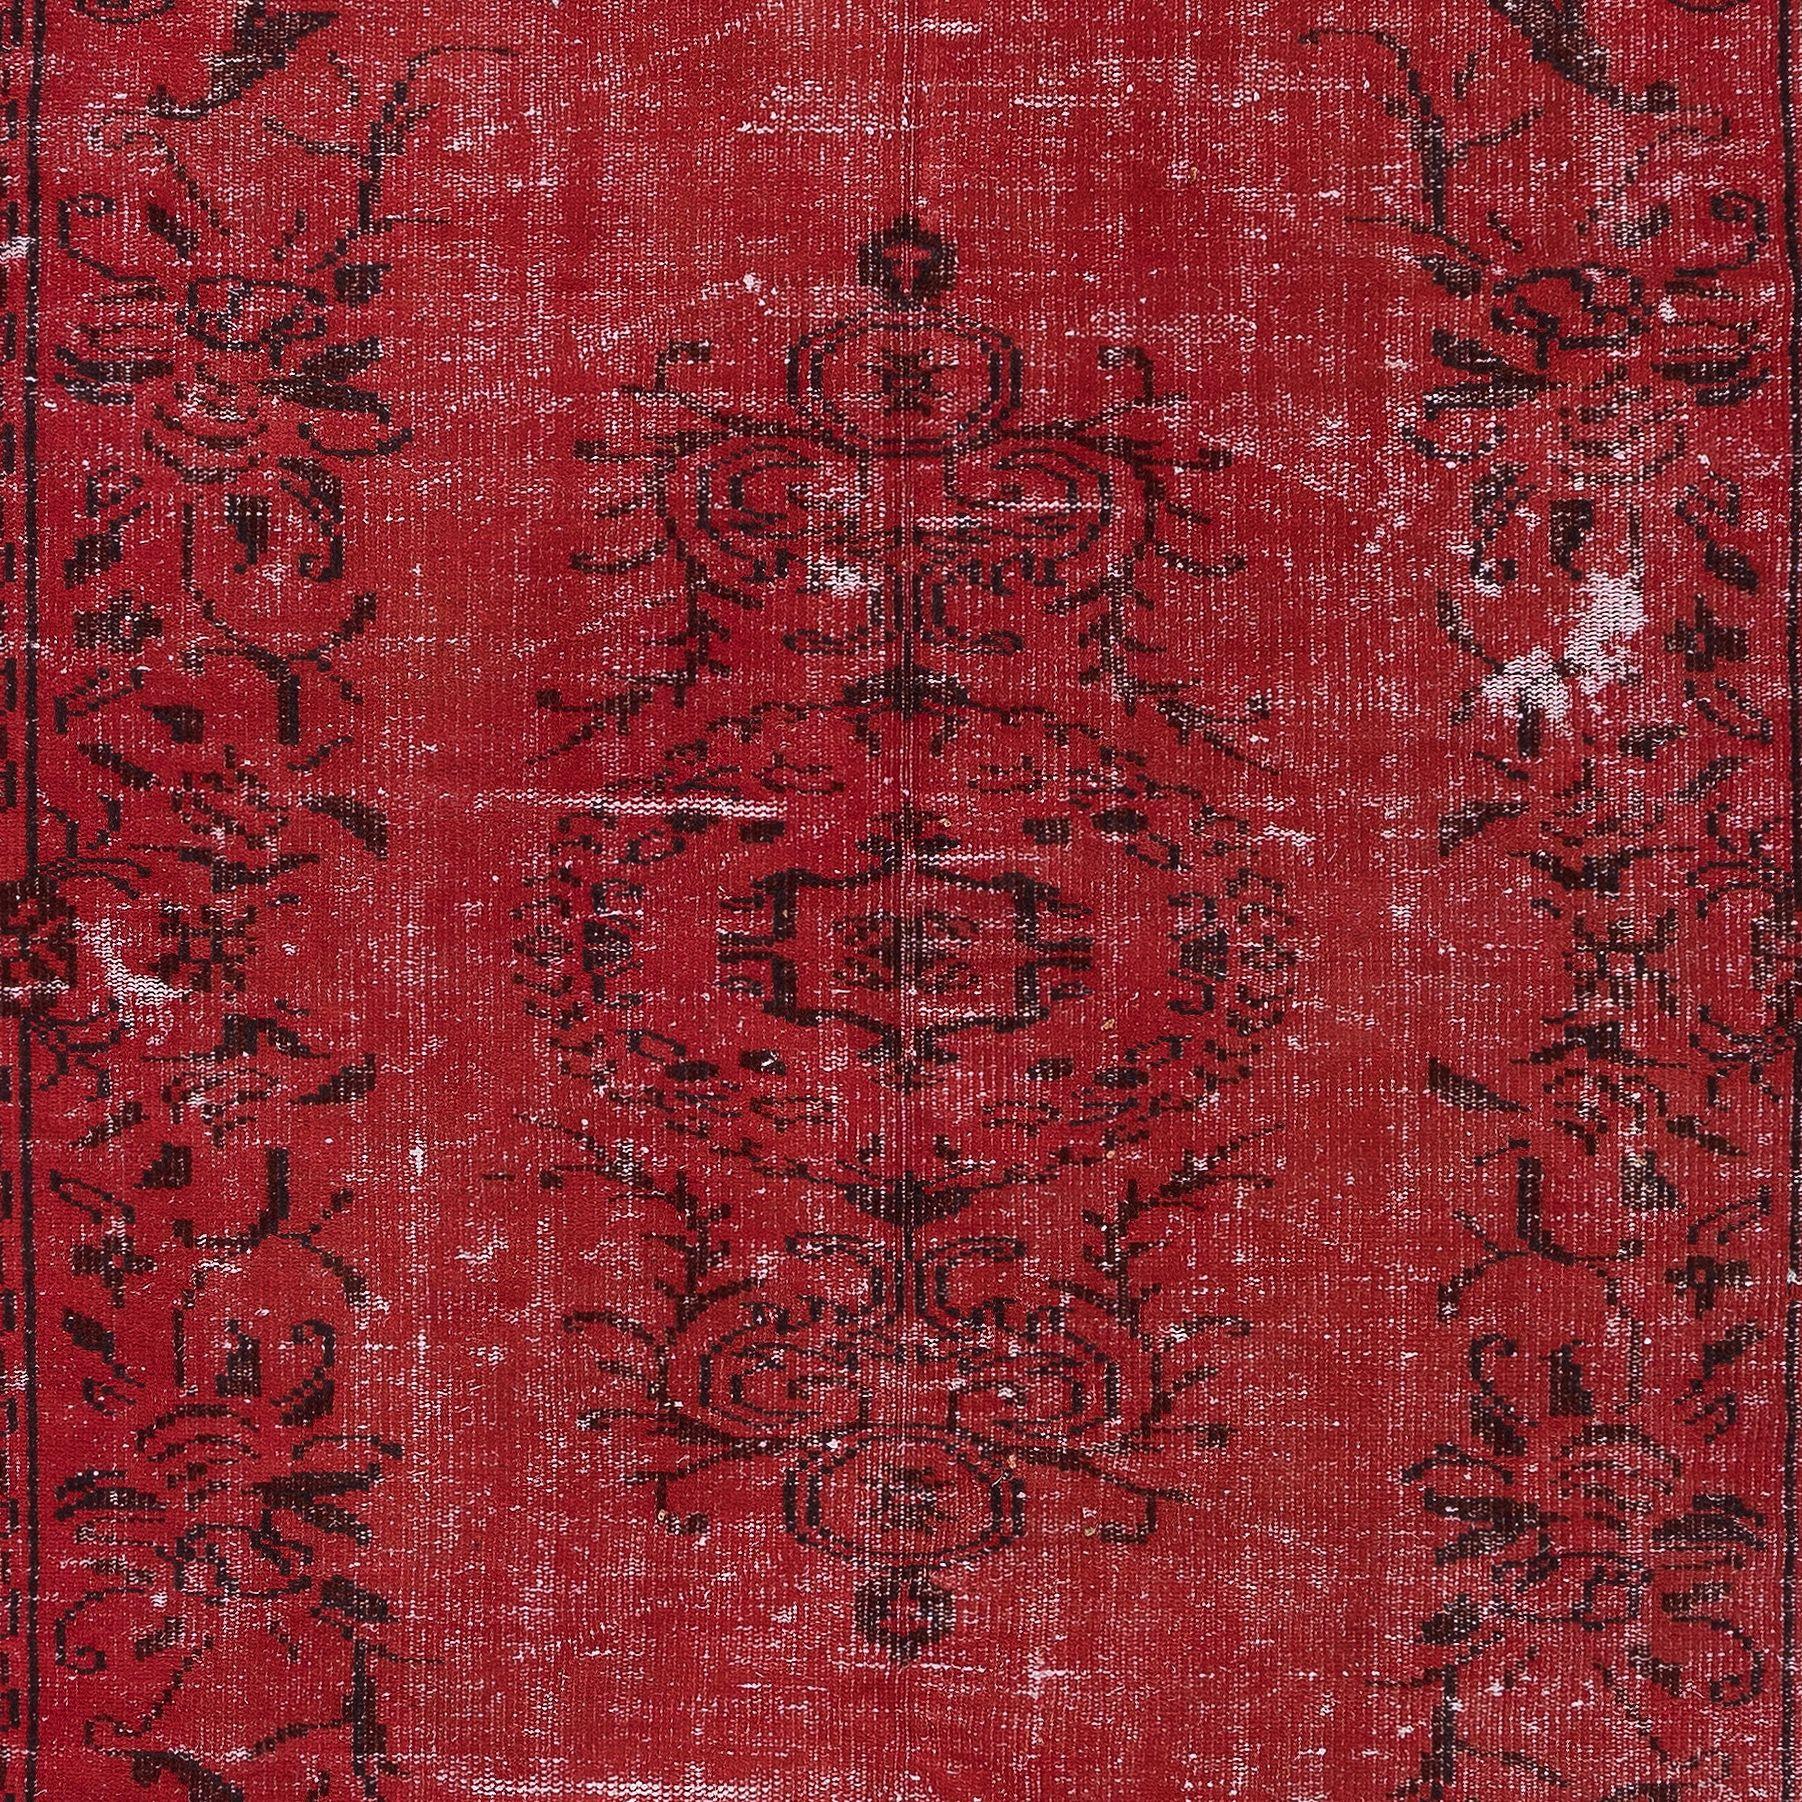 5x8 Ft Contemporary Wool Area Rug in Burgundy Red, Hand-Knotted in Turkey In Good Condition For Sale In Philadelphia, PA